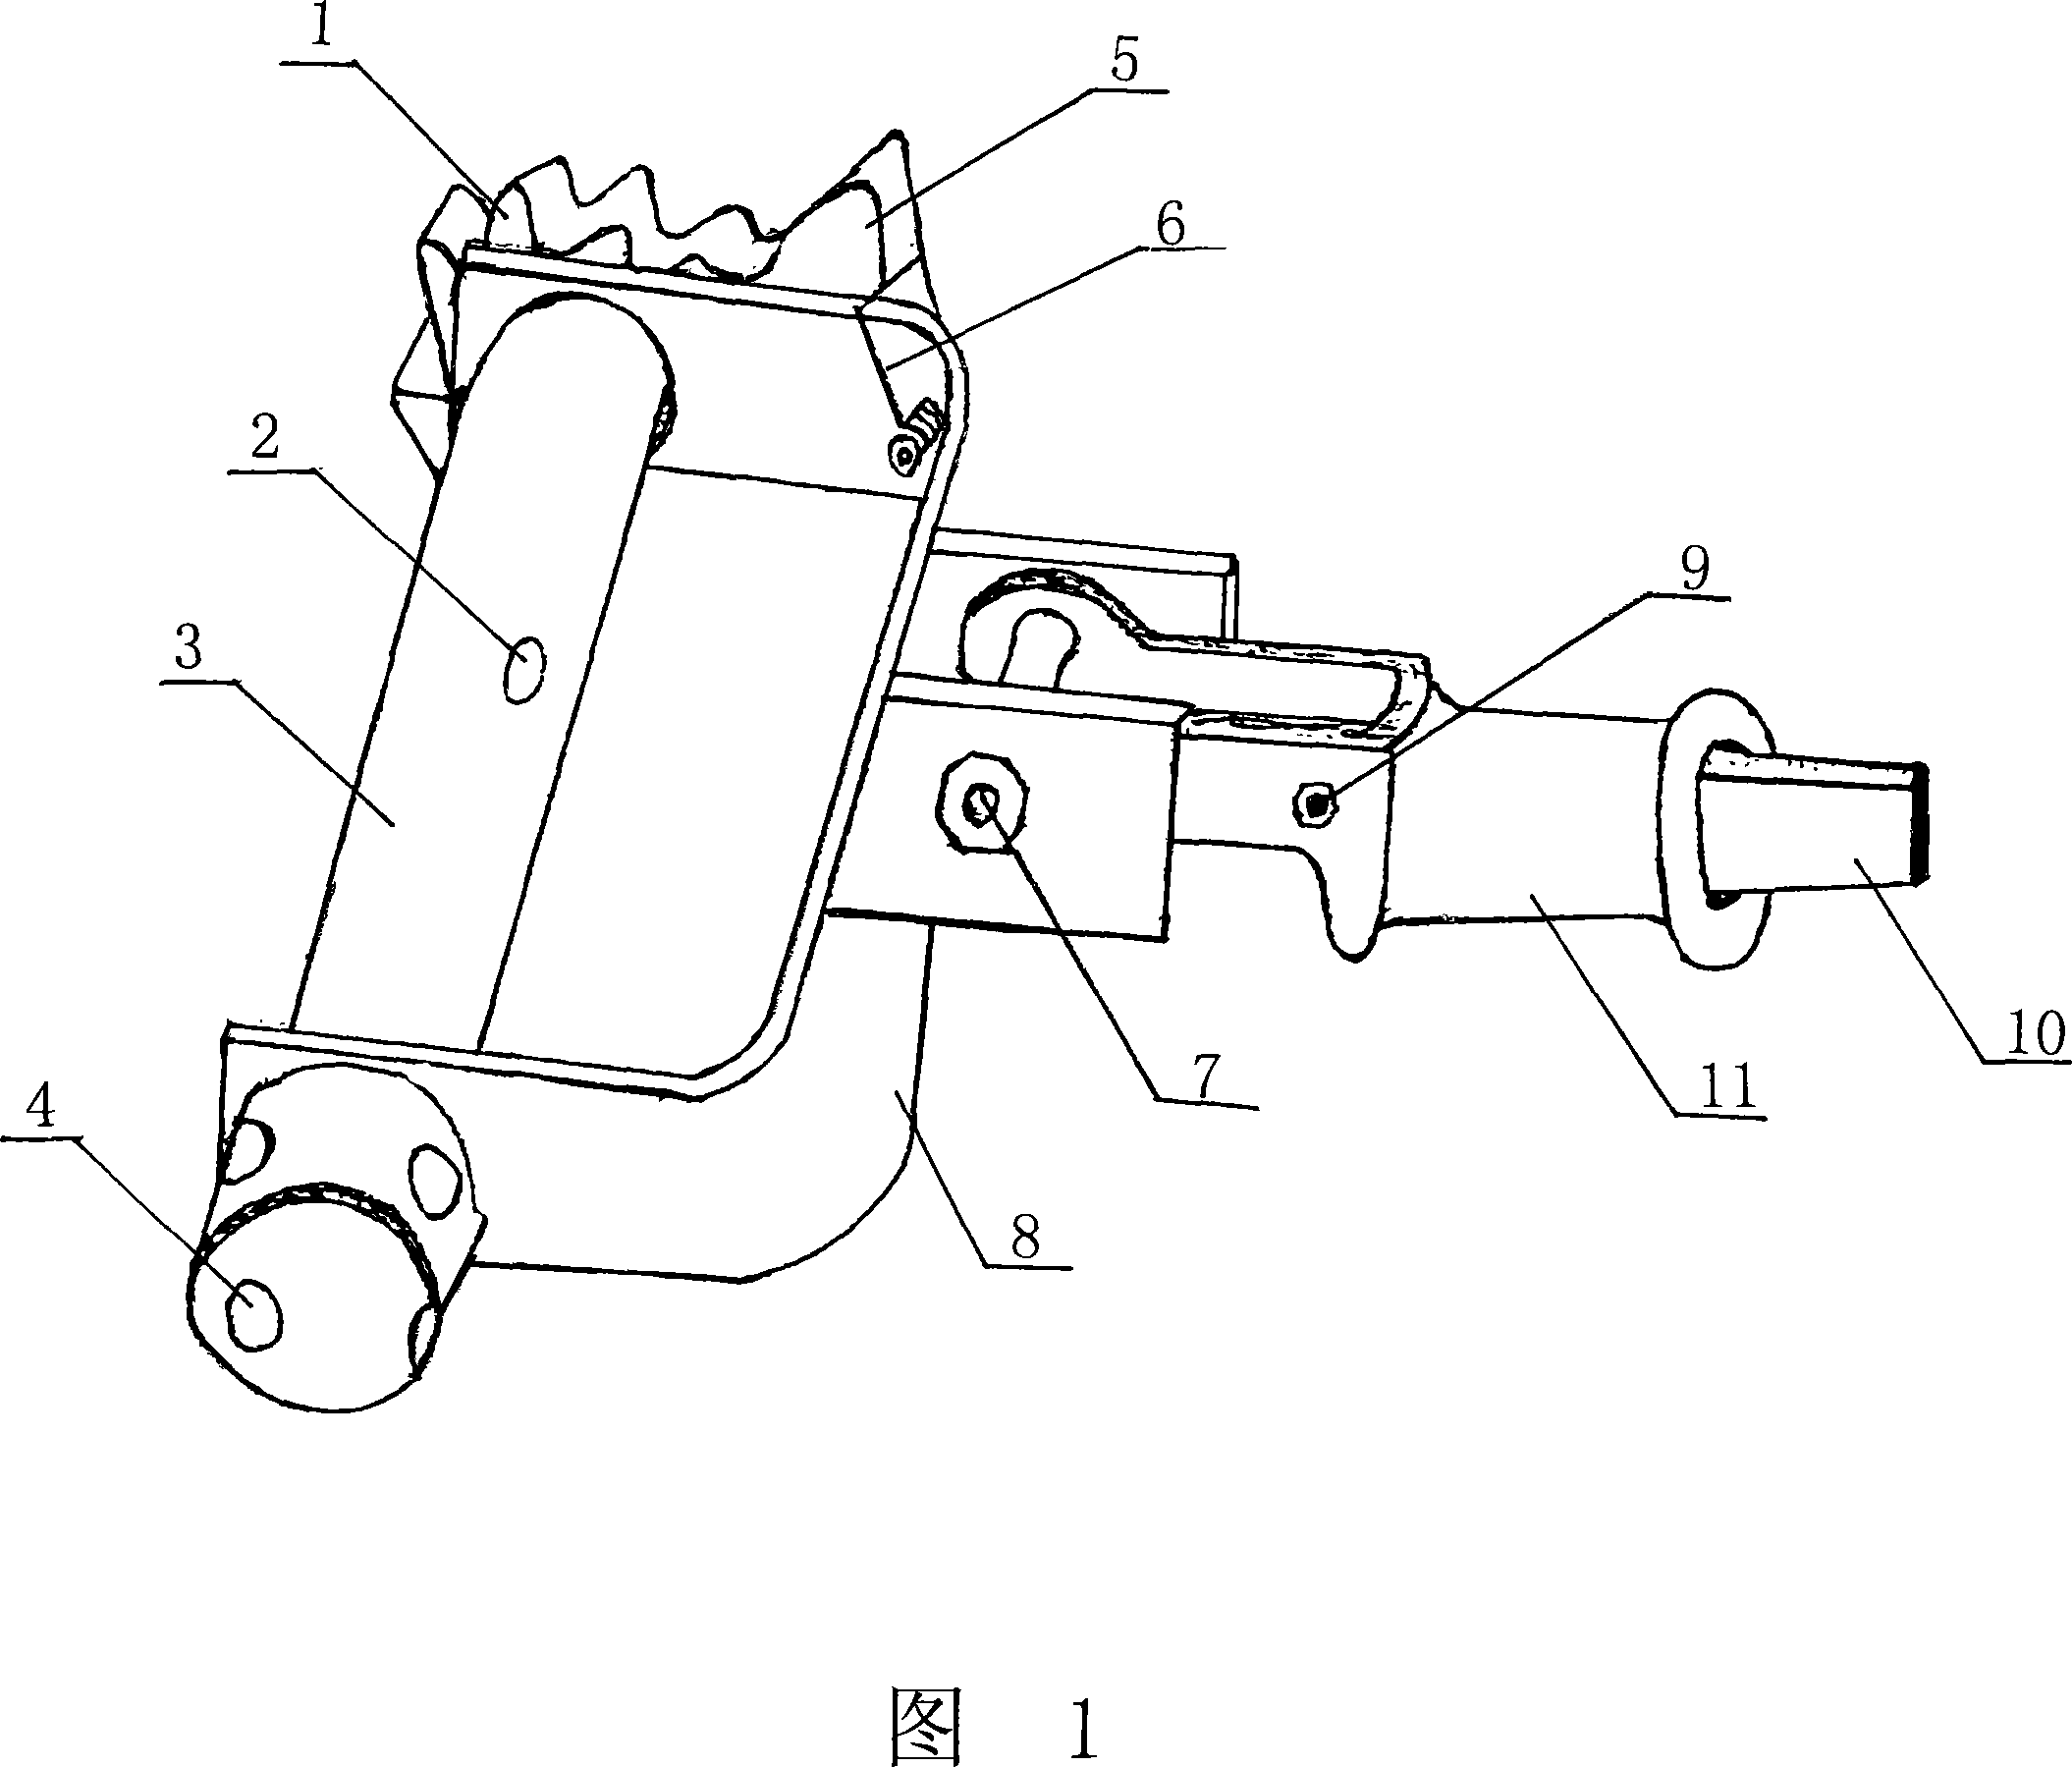 Mechanical rope tightening device